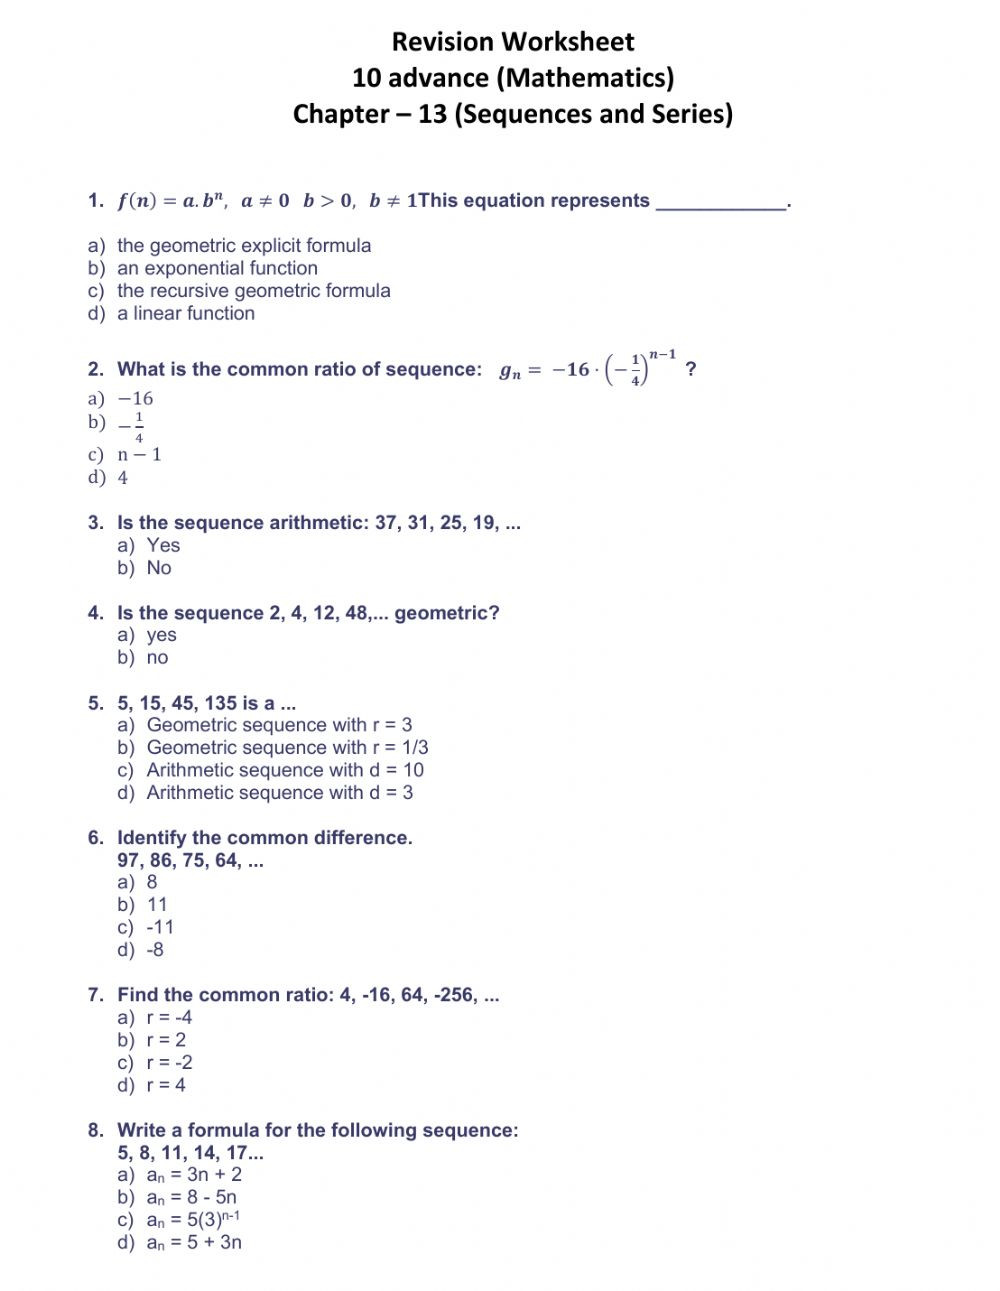 Geometric Sequence and Series Worksheet Sequences and Series Ch 13 10a Interactive Worksheet